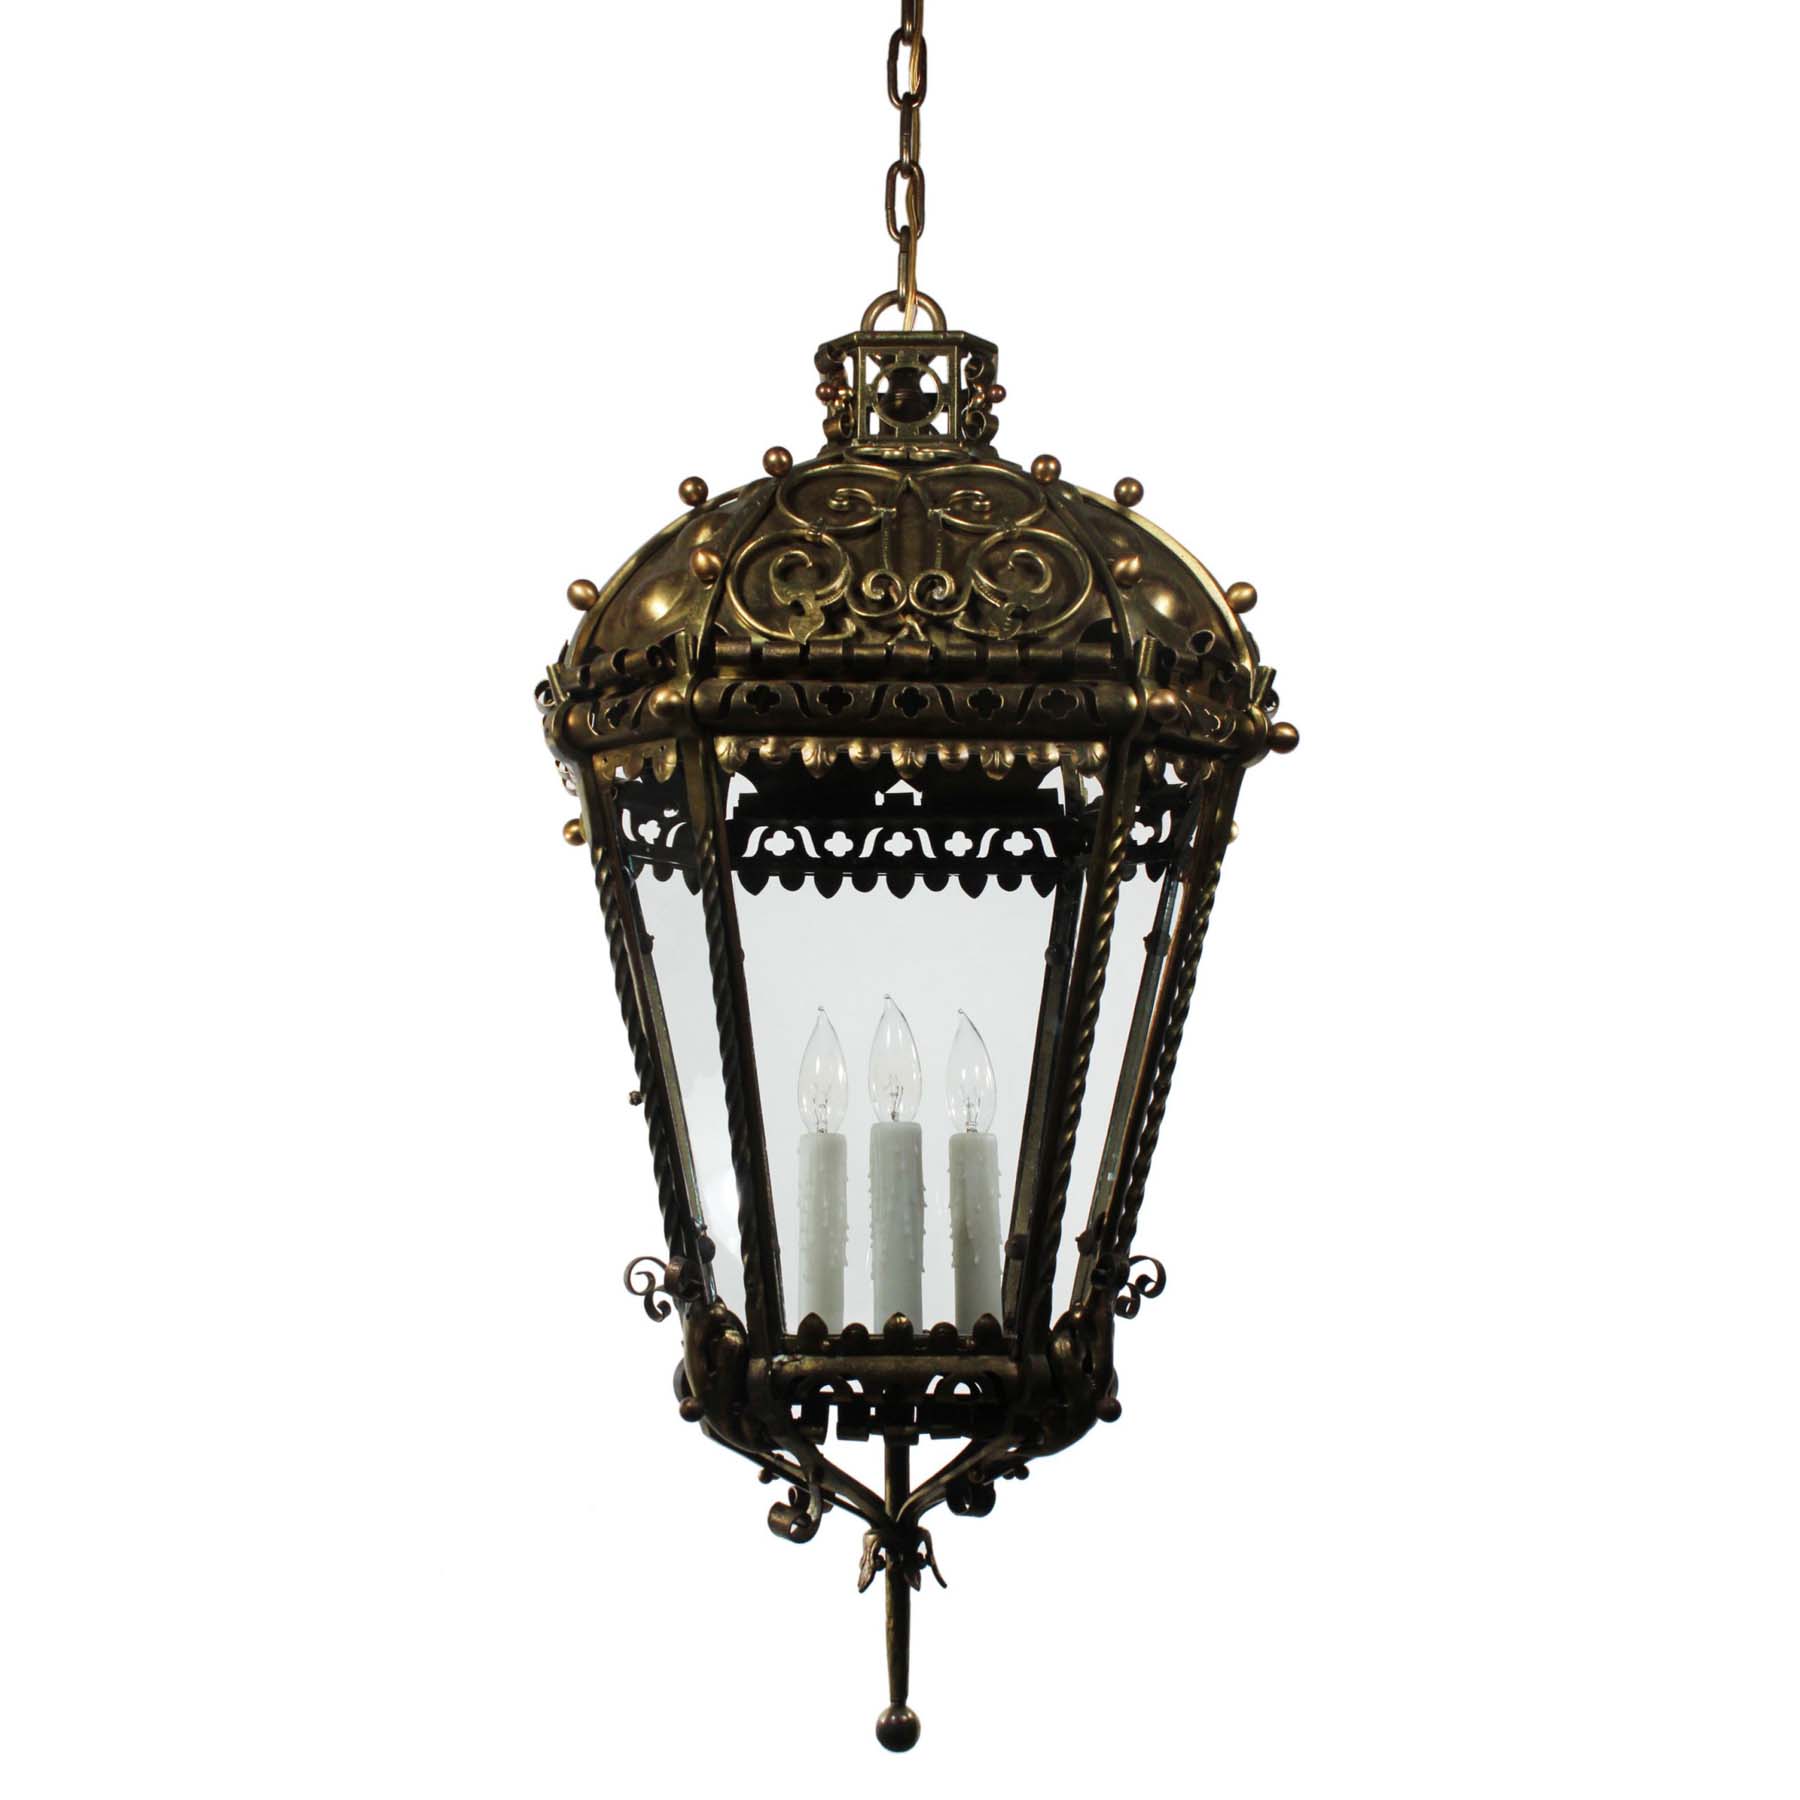 SOLD Substantial Antique Brass Three-Light Lantern Chandelier, Early 1900s-0